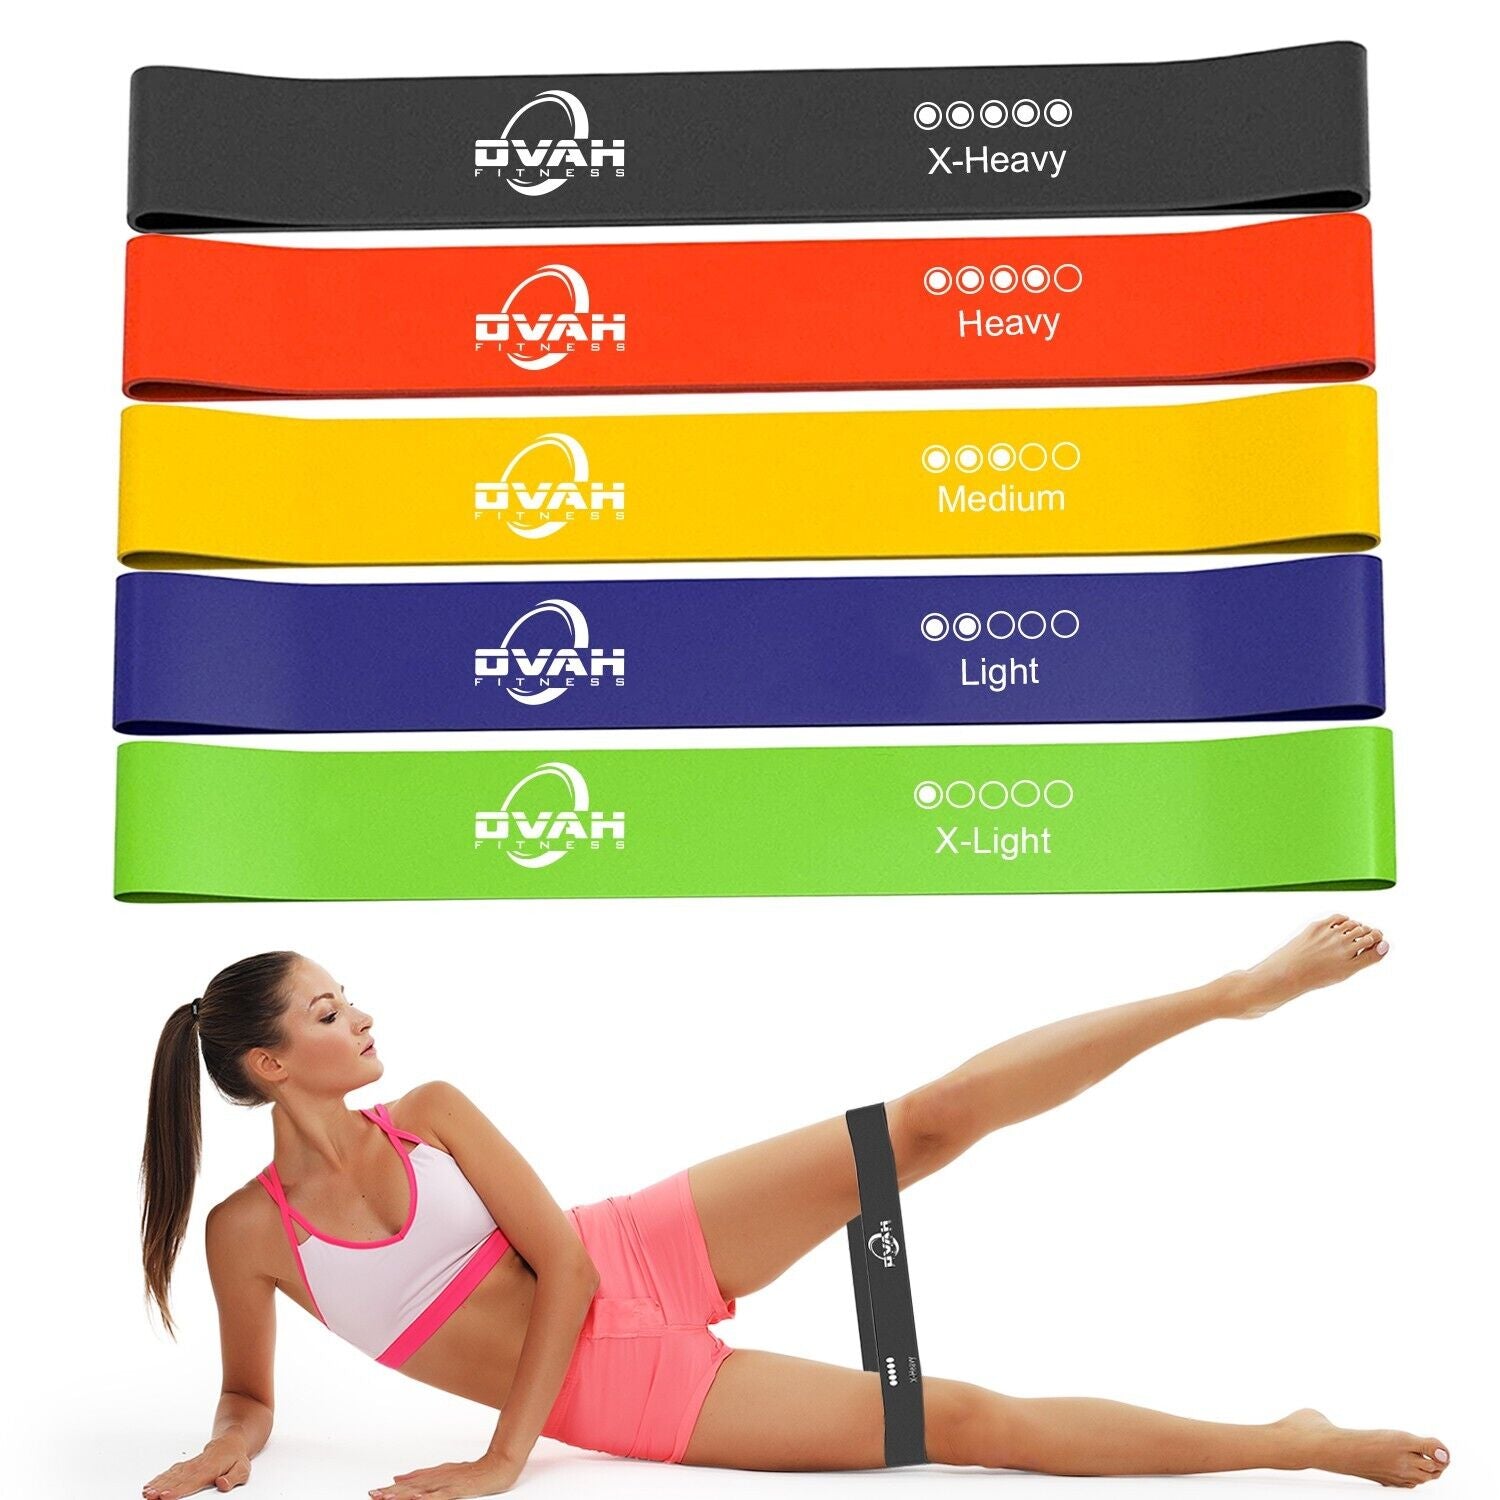 Resistance Bands for exercise and fitness